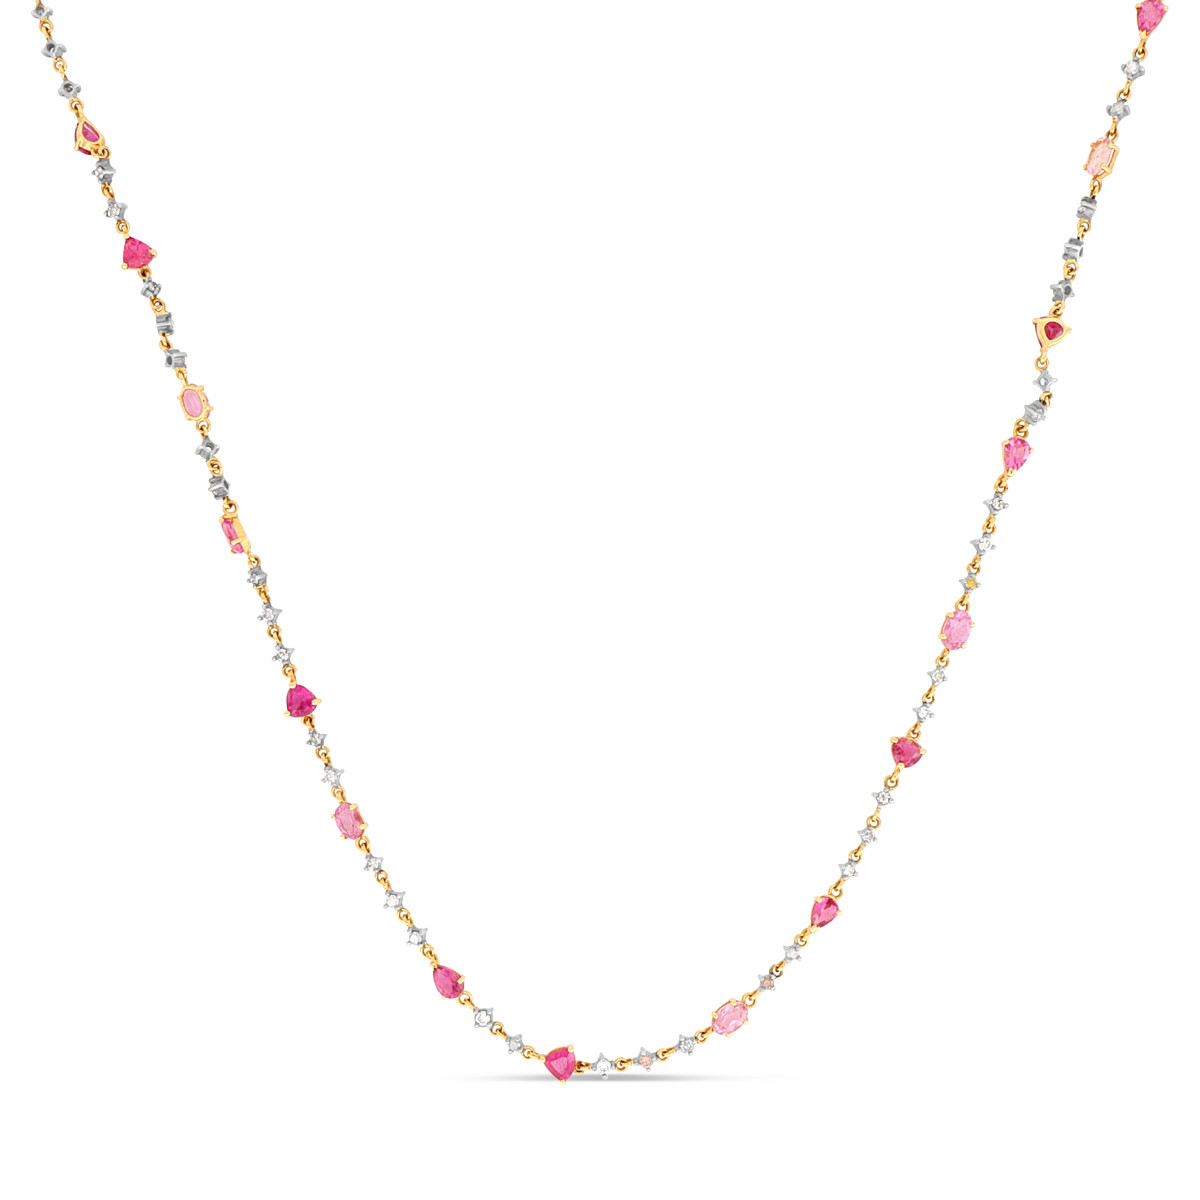 18k Yellow Gold Long Gemstone Necklace with Brown Diamonds, Pink Tourmalines and Rubellites